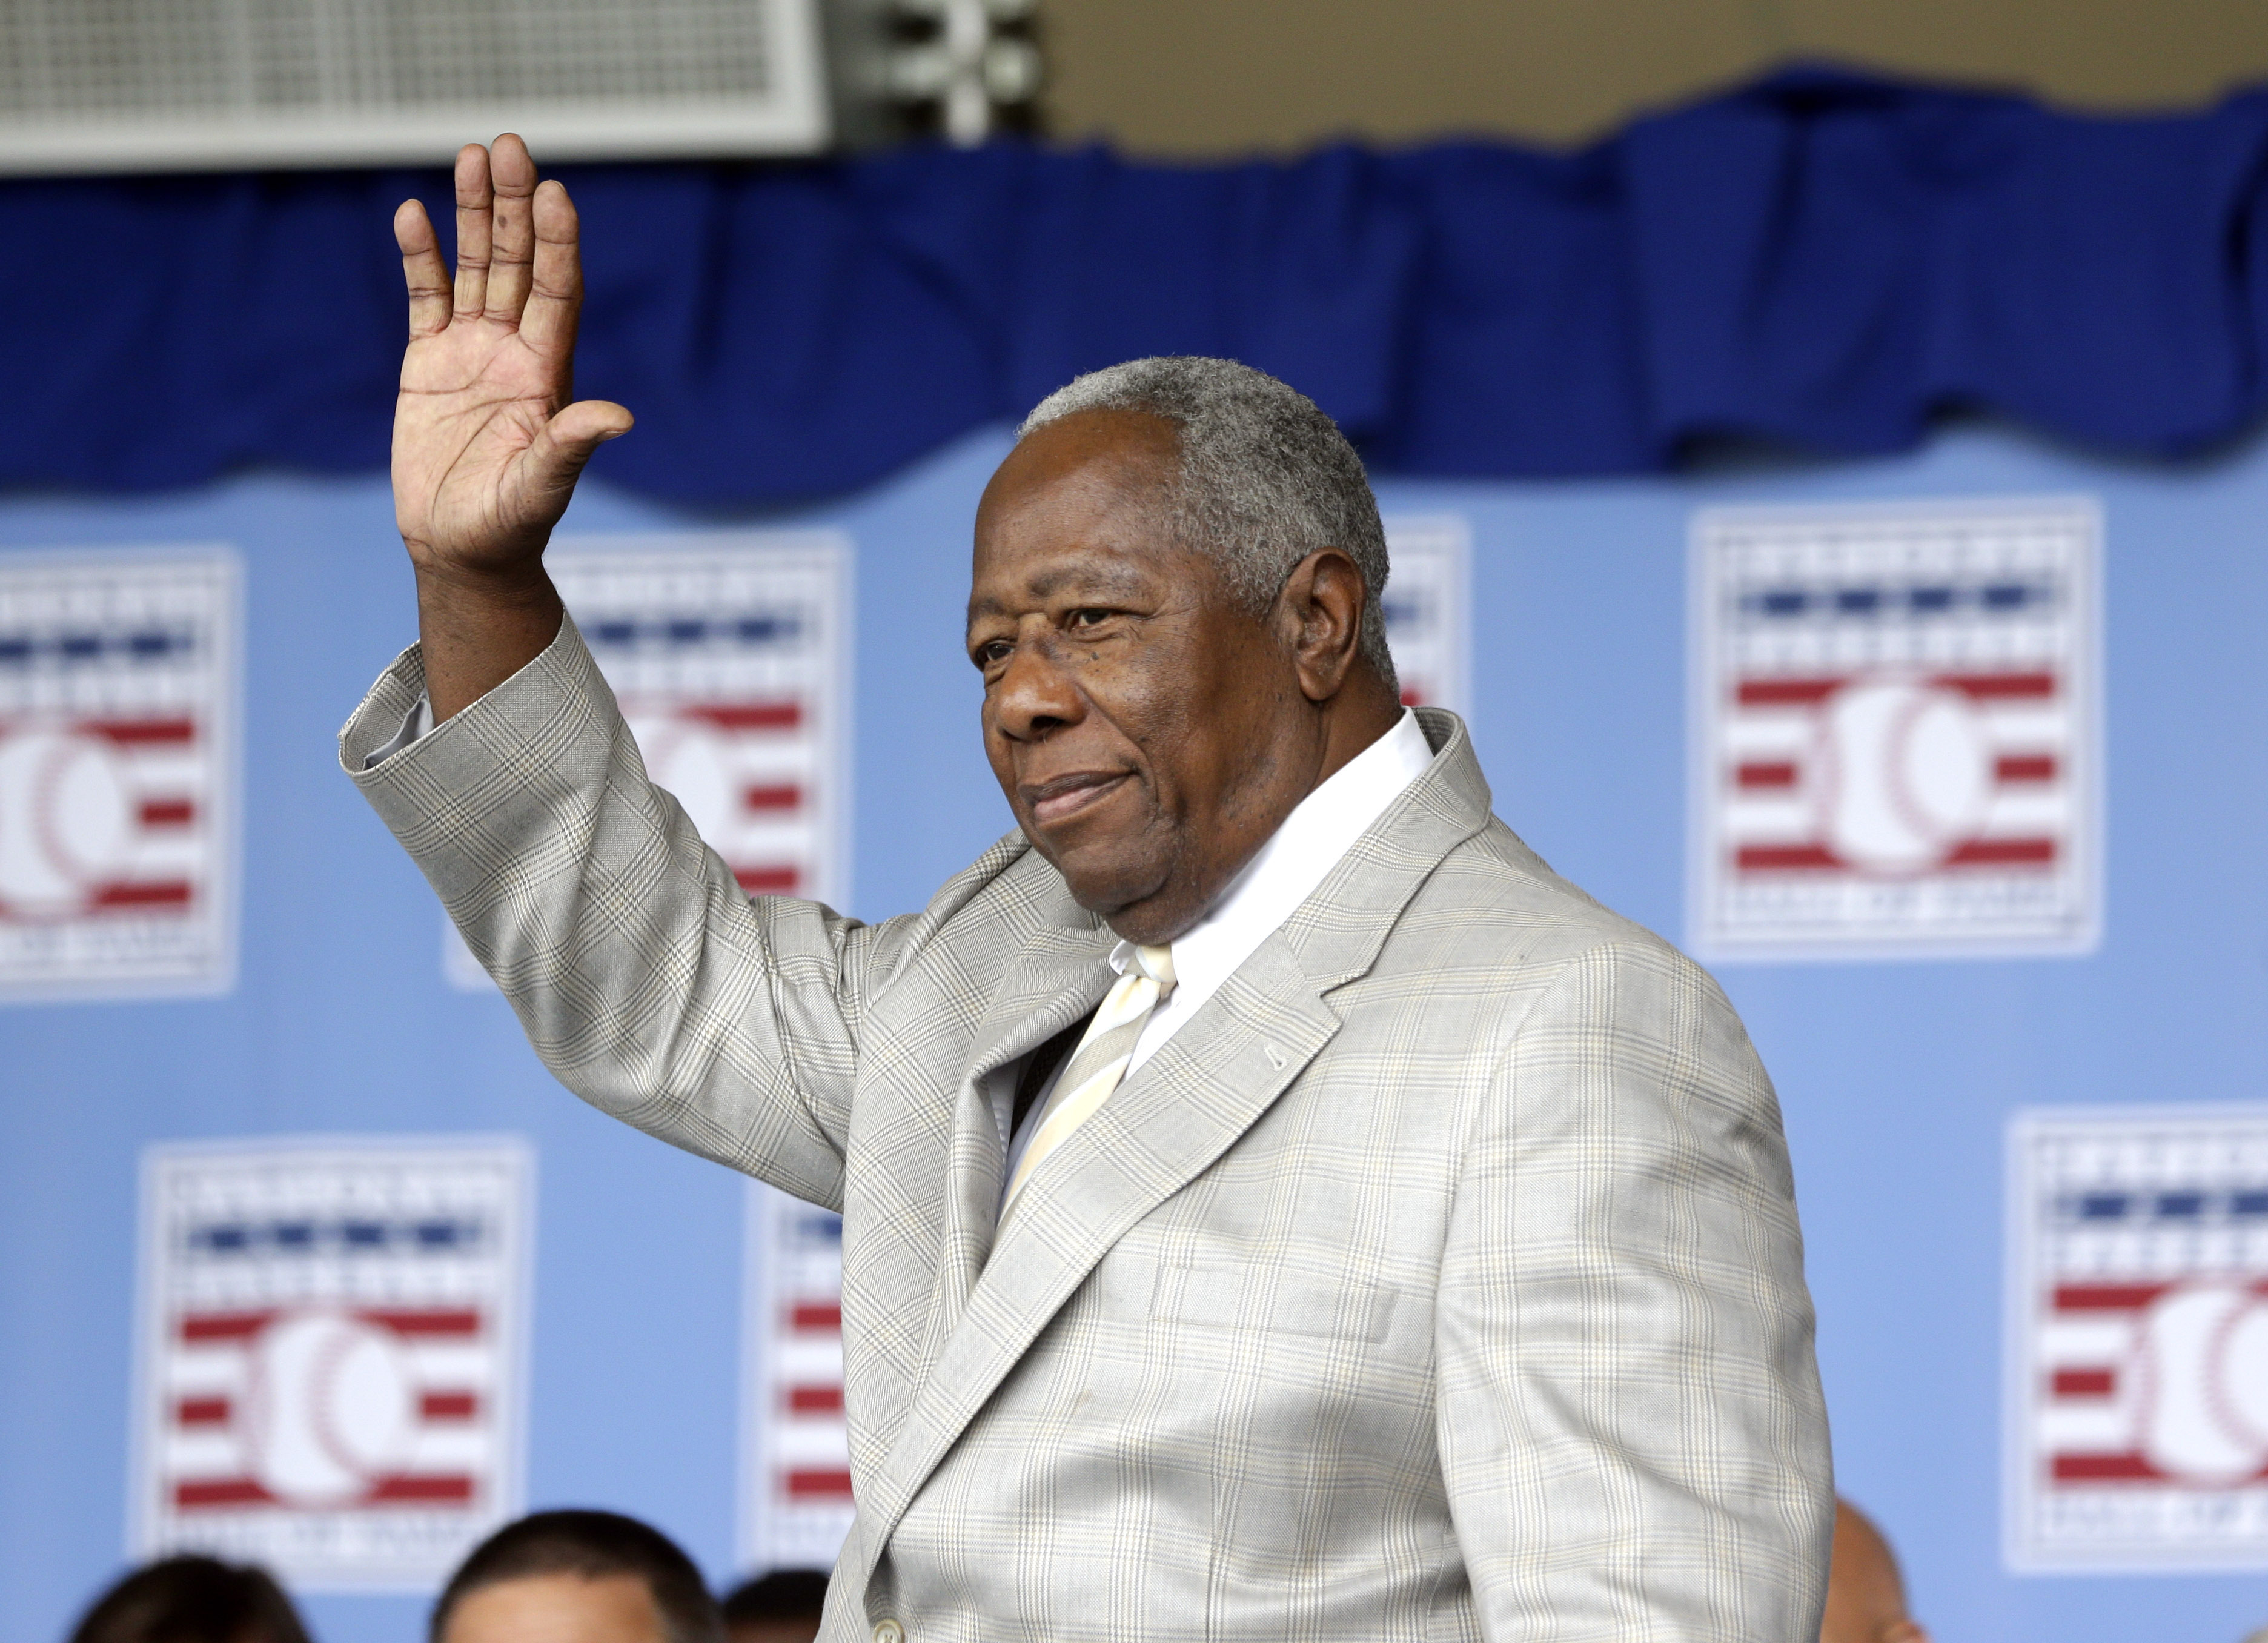 A timeline of Hank Aaron's life and career